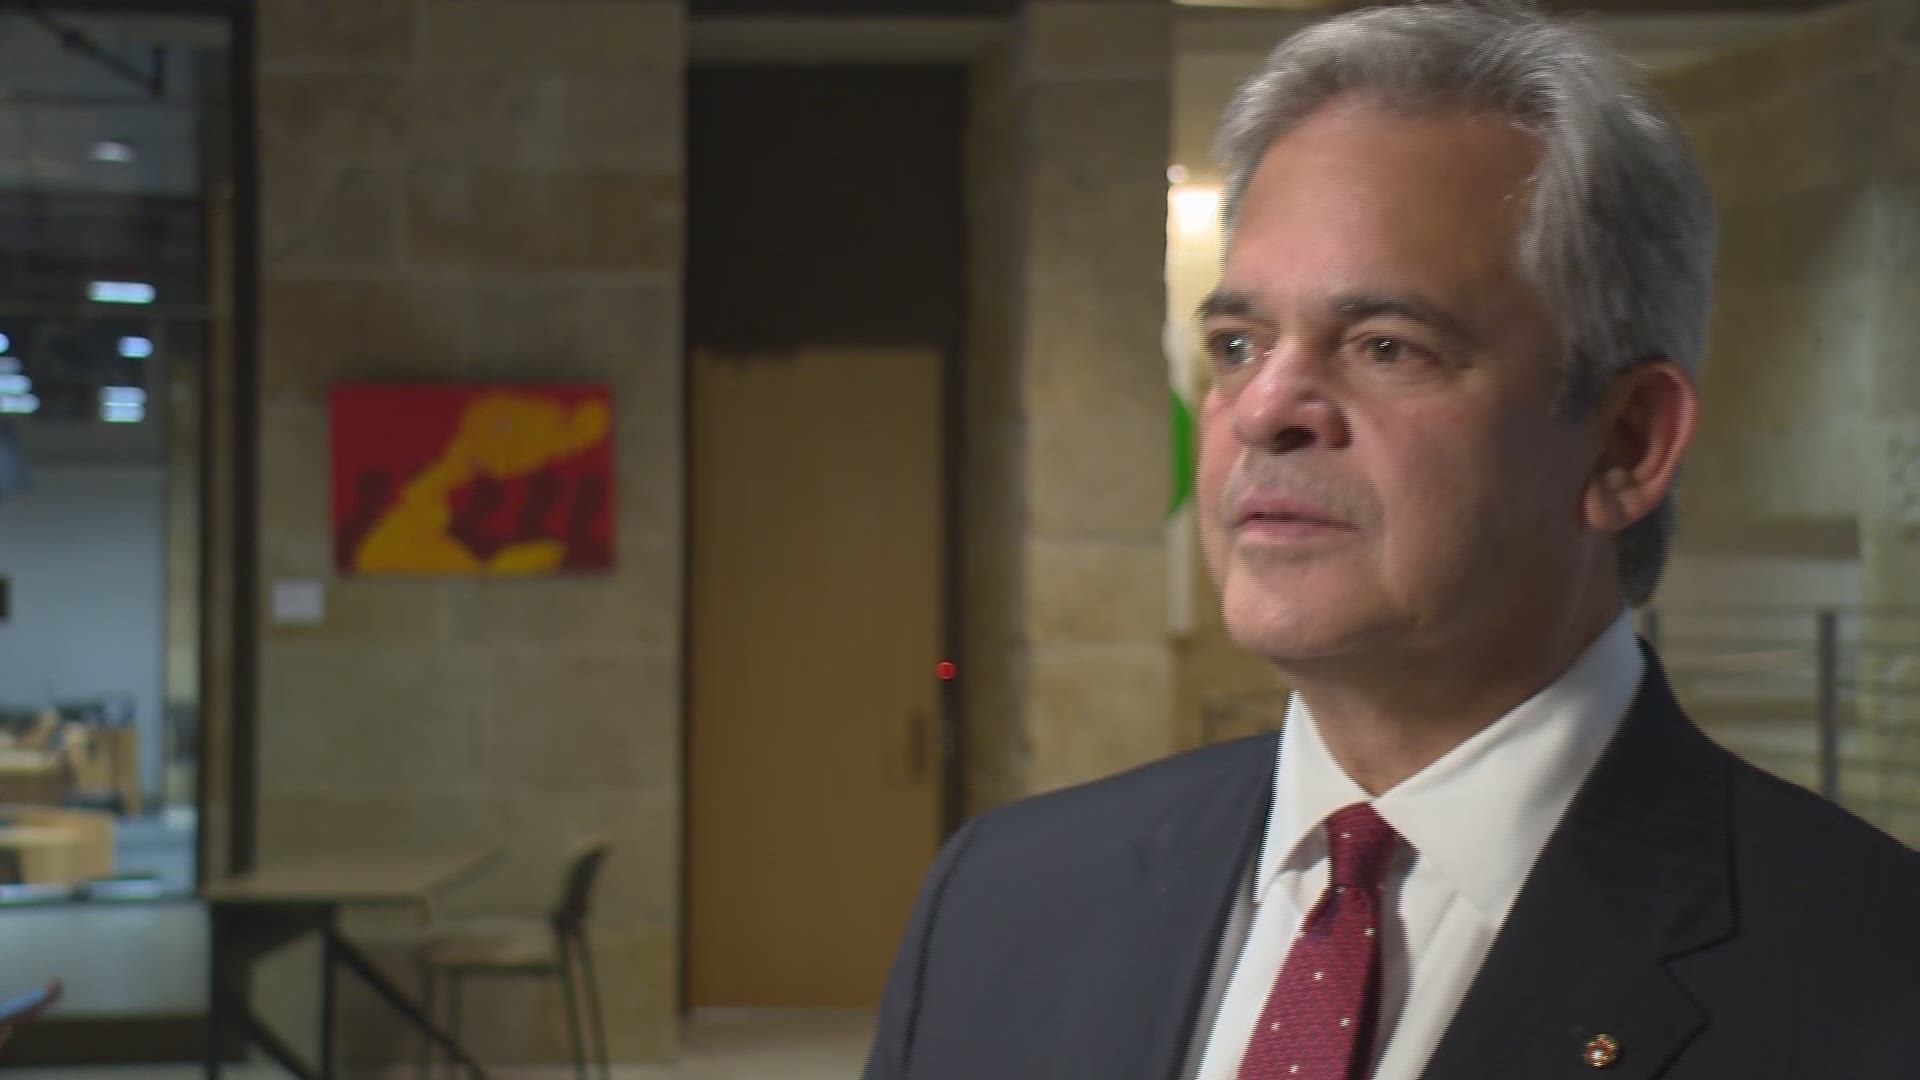 Austin Mayor Steve Adler spoke to KVUE after the council meeting and said that after these changes, the city can 'pivot to actually doing the real work.'